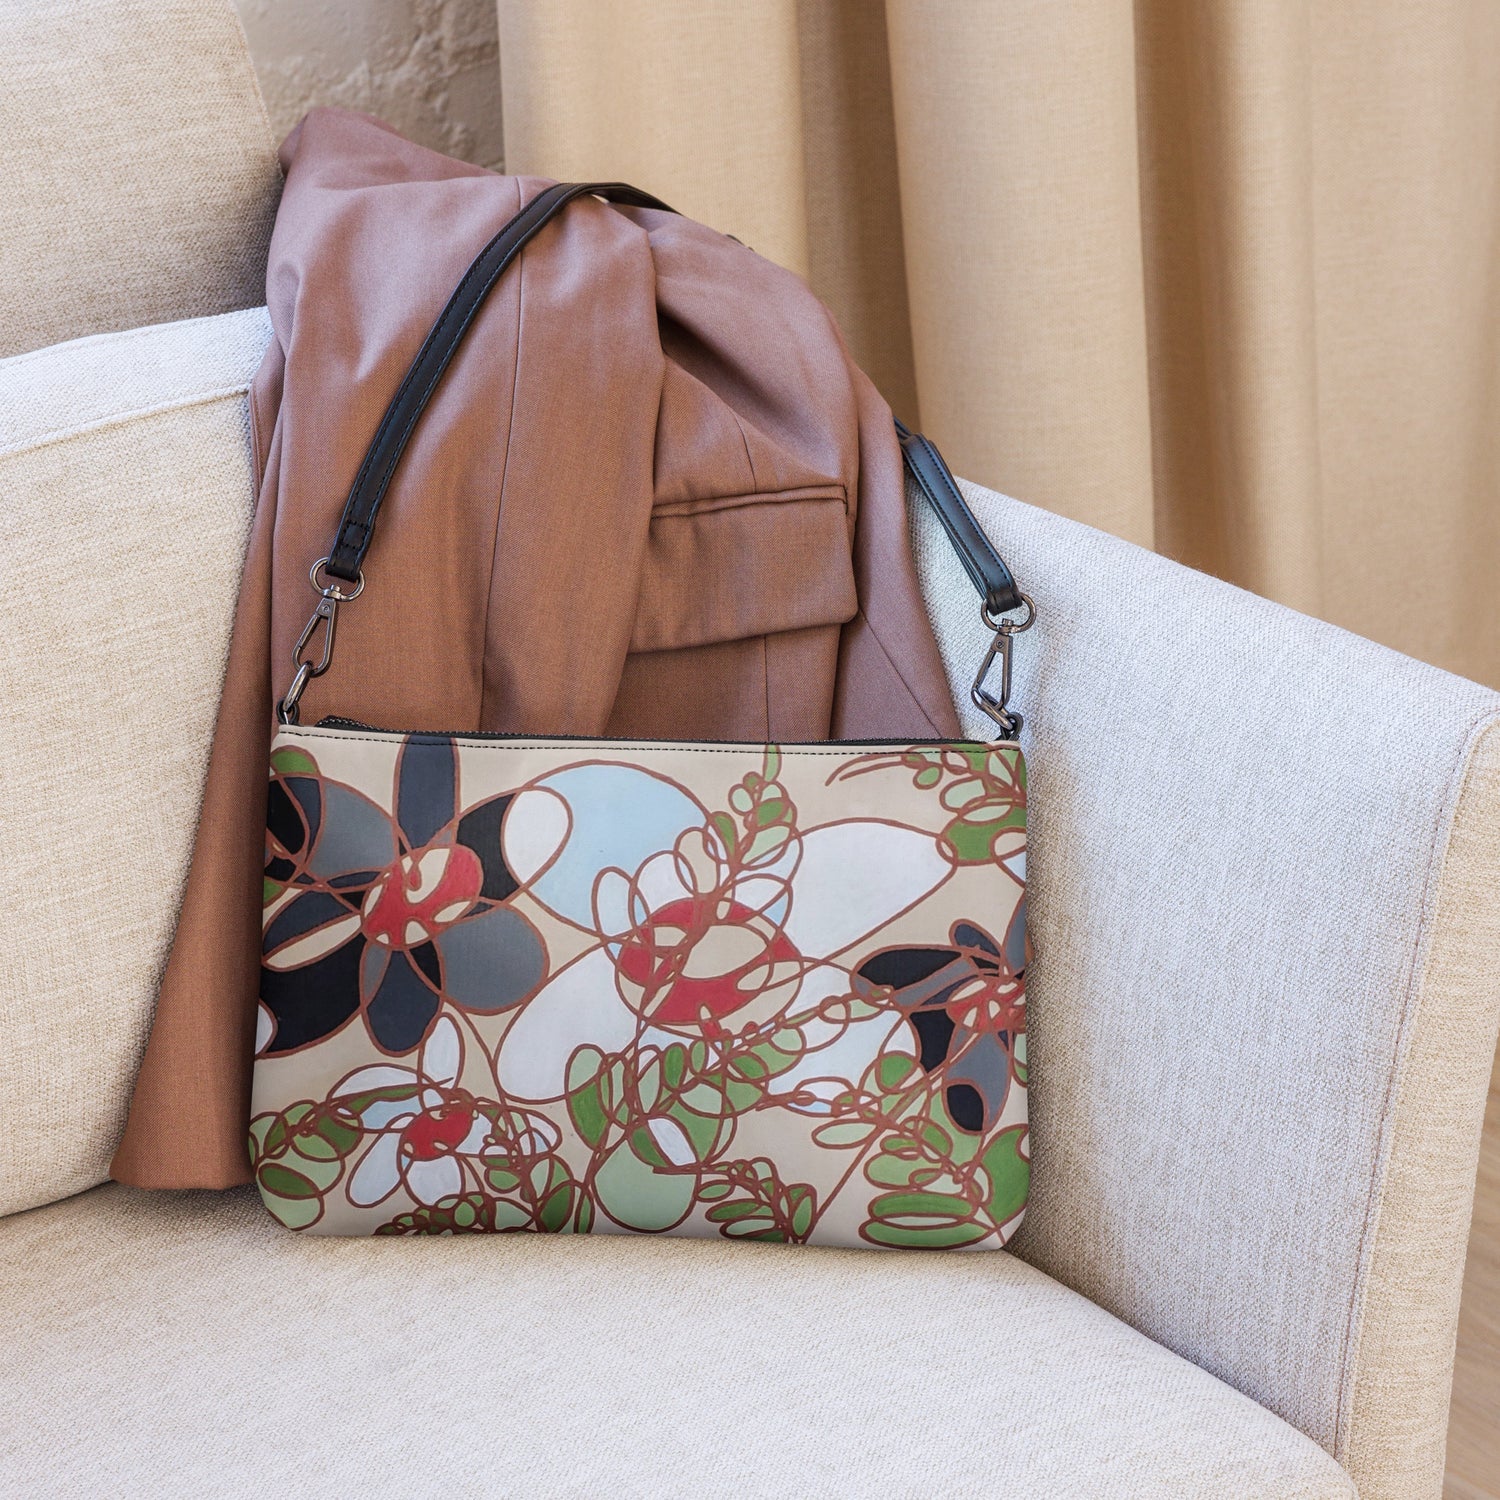 A purse with a black strap, in the corner of a couch leaning against a leather jacket. The purse has an abstract flower design in burnt orange, black and white 